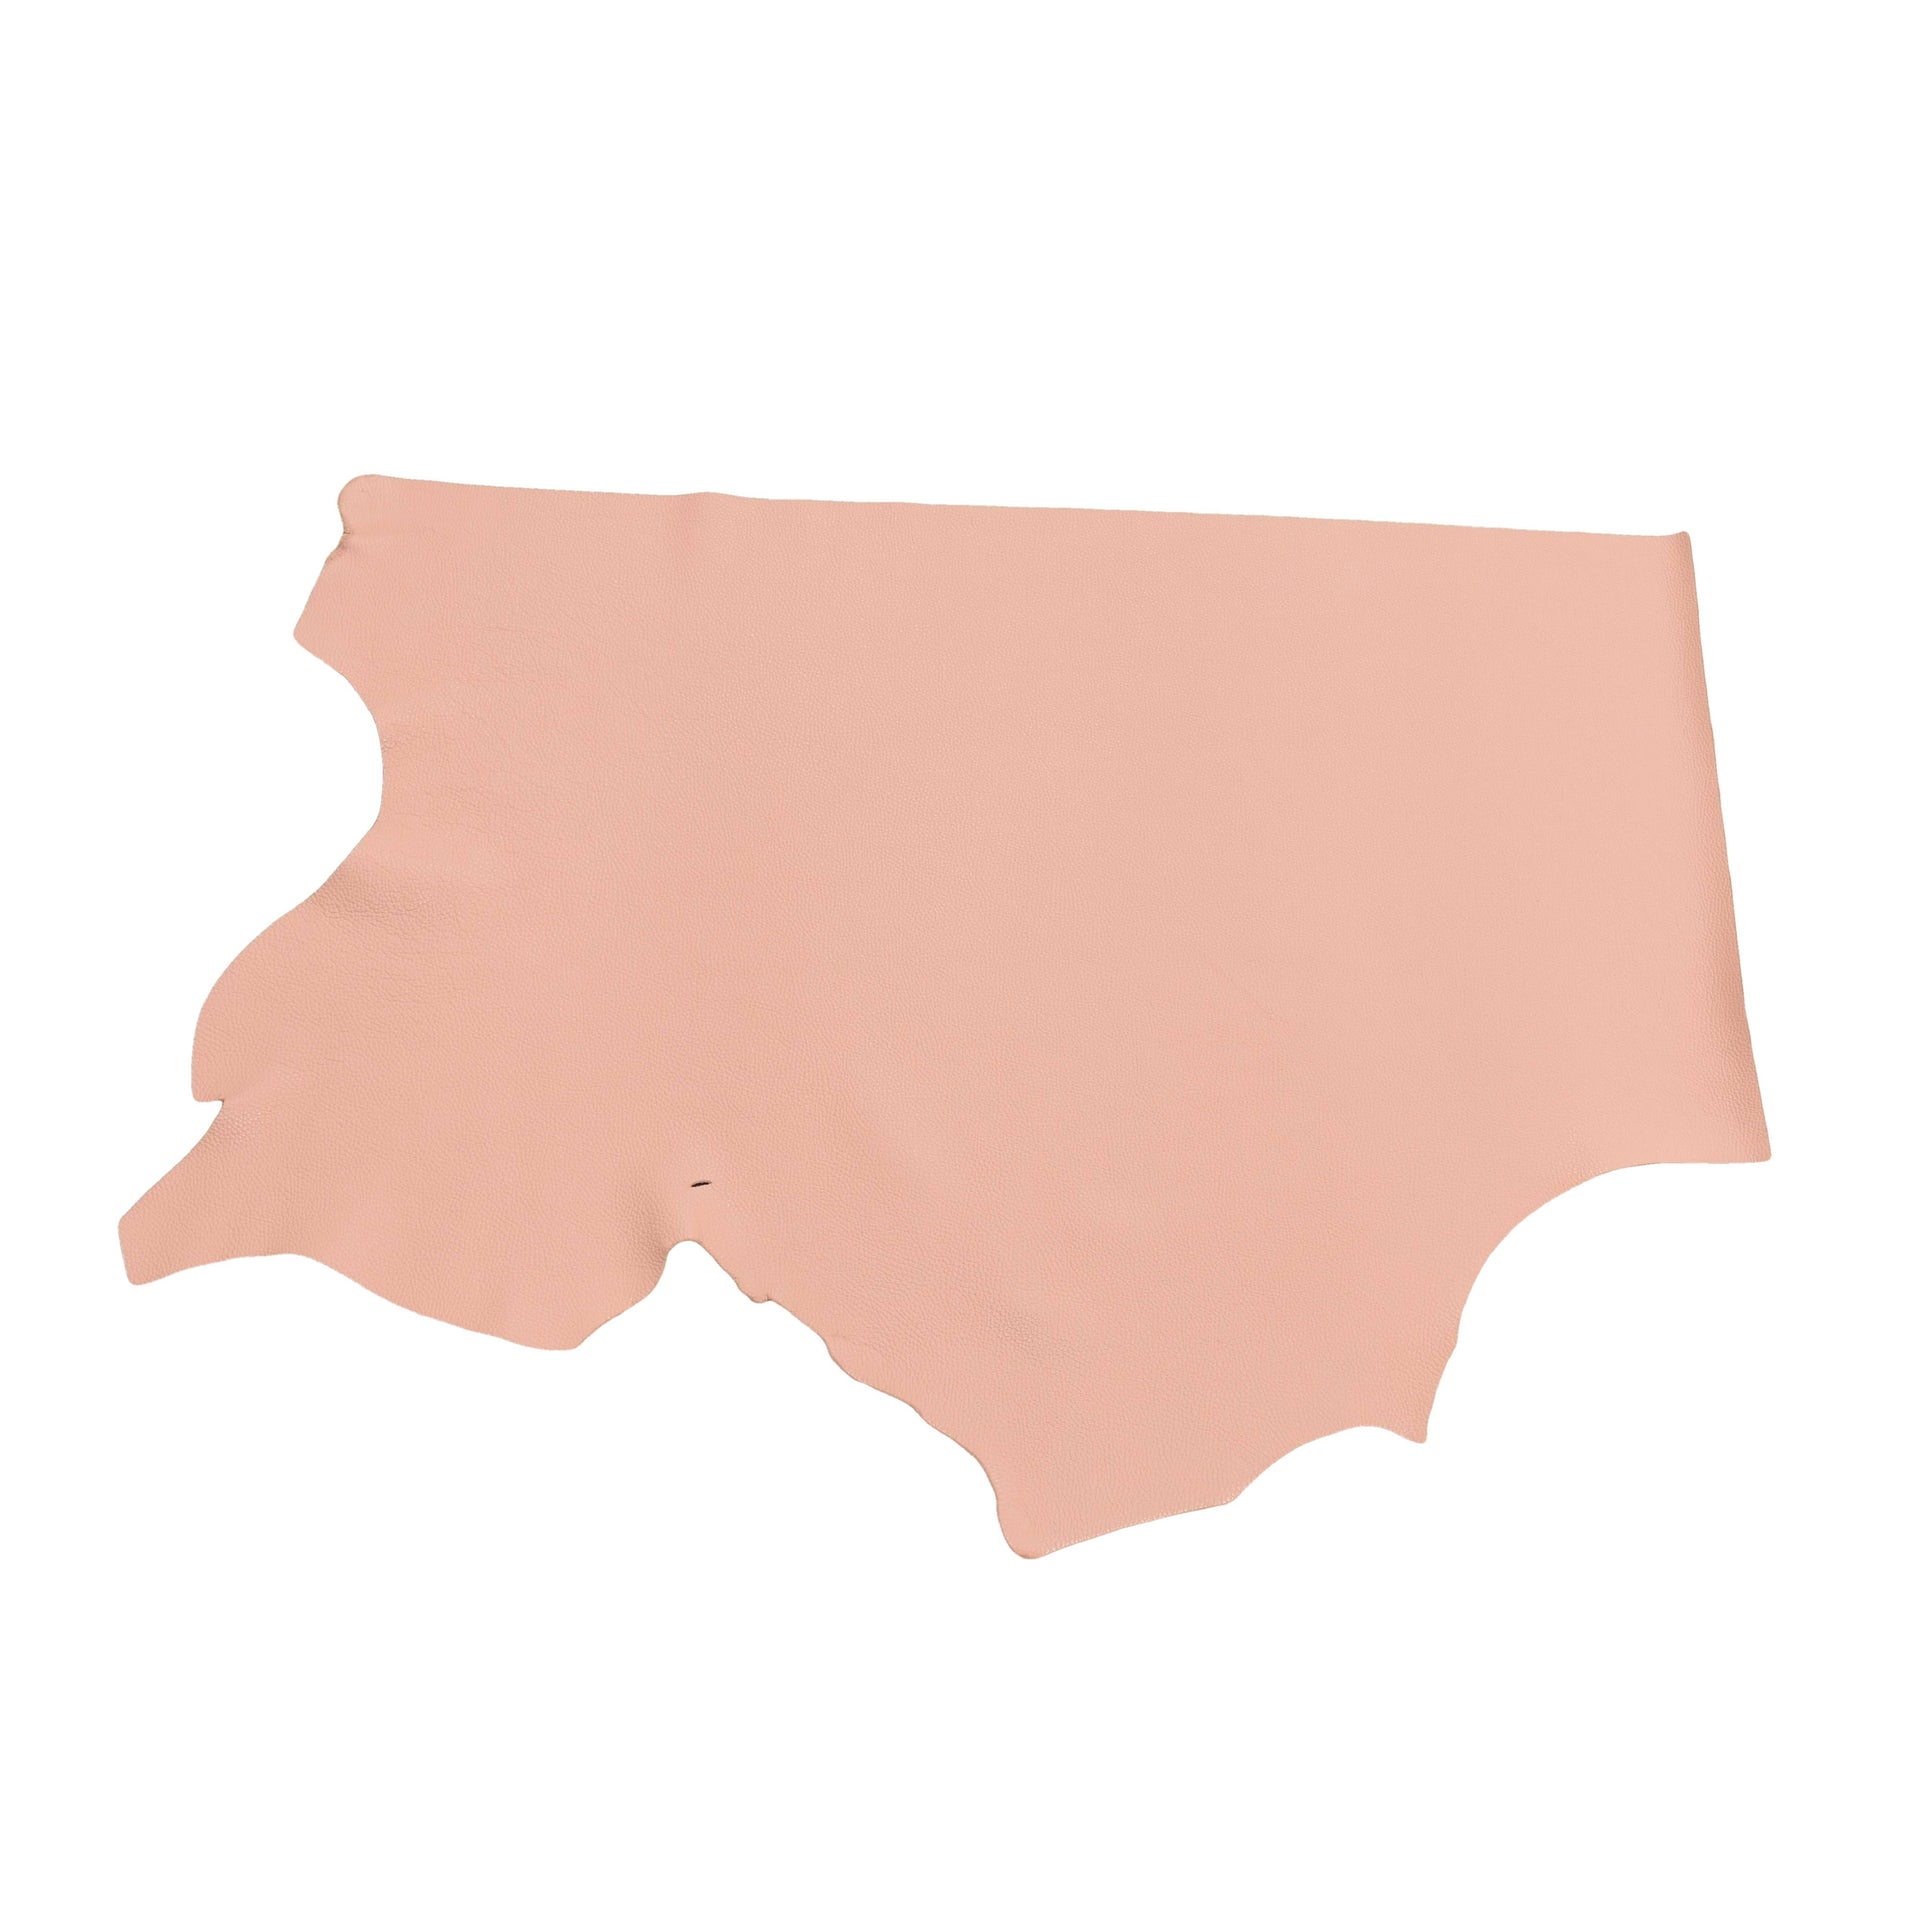 San Diego Sweet Pink Tried n True 3-4 oz Leather Cow Hides, 6.5-7.5 Square Foot / Project Piece (Bottom) | The Leather Guy